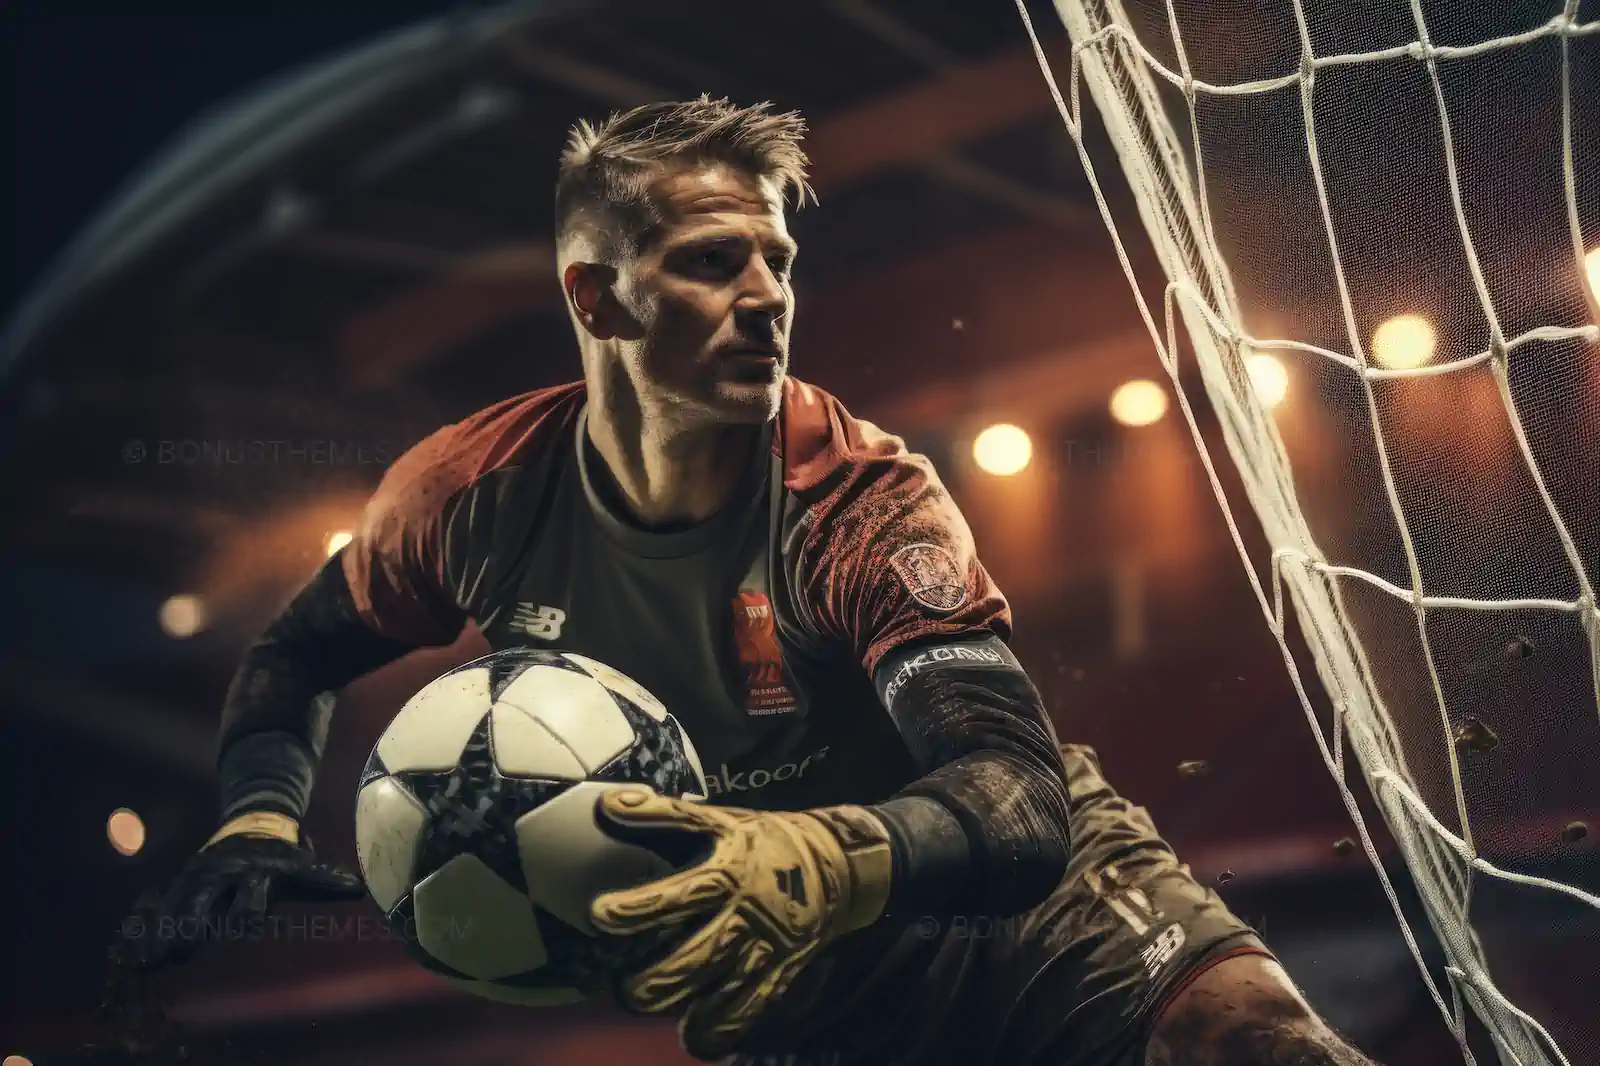 Goalkeeper in action with soccer ball